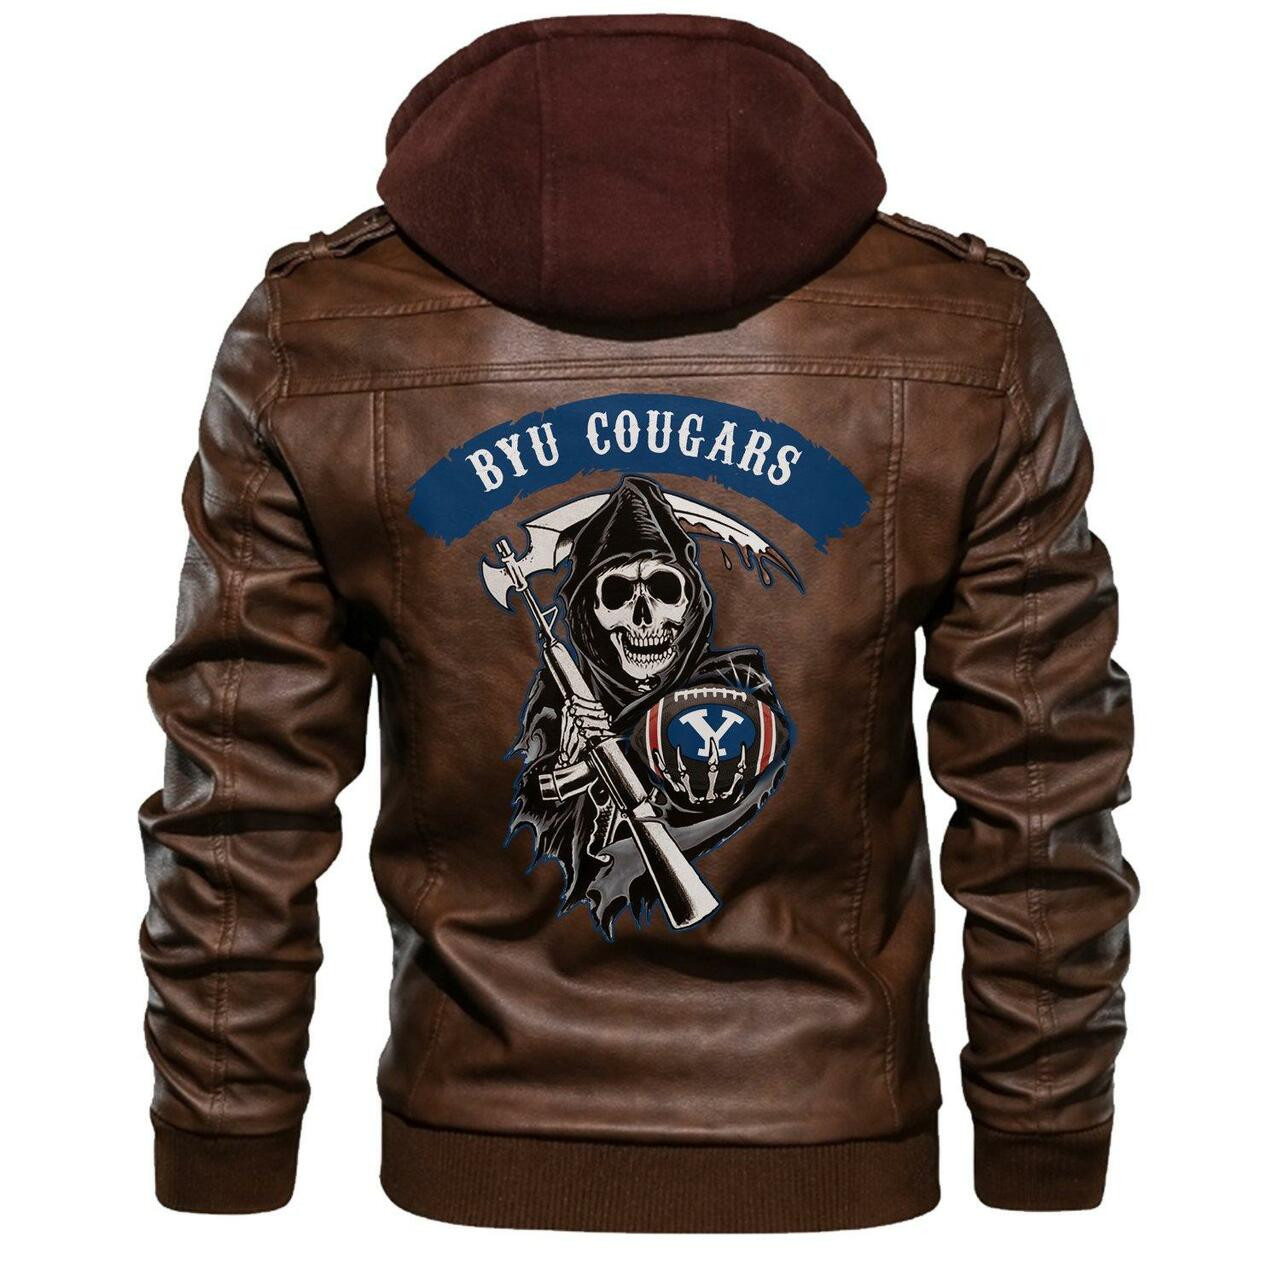 Are you looking for a great leather jacket? 141